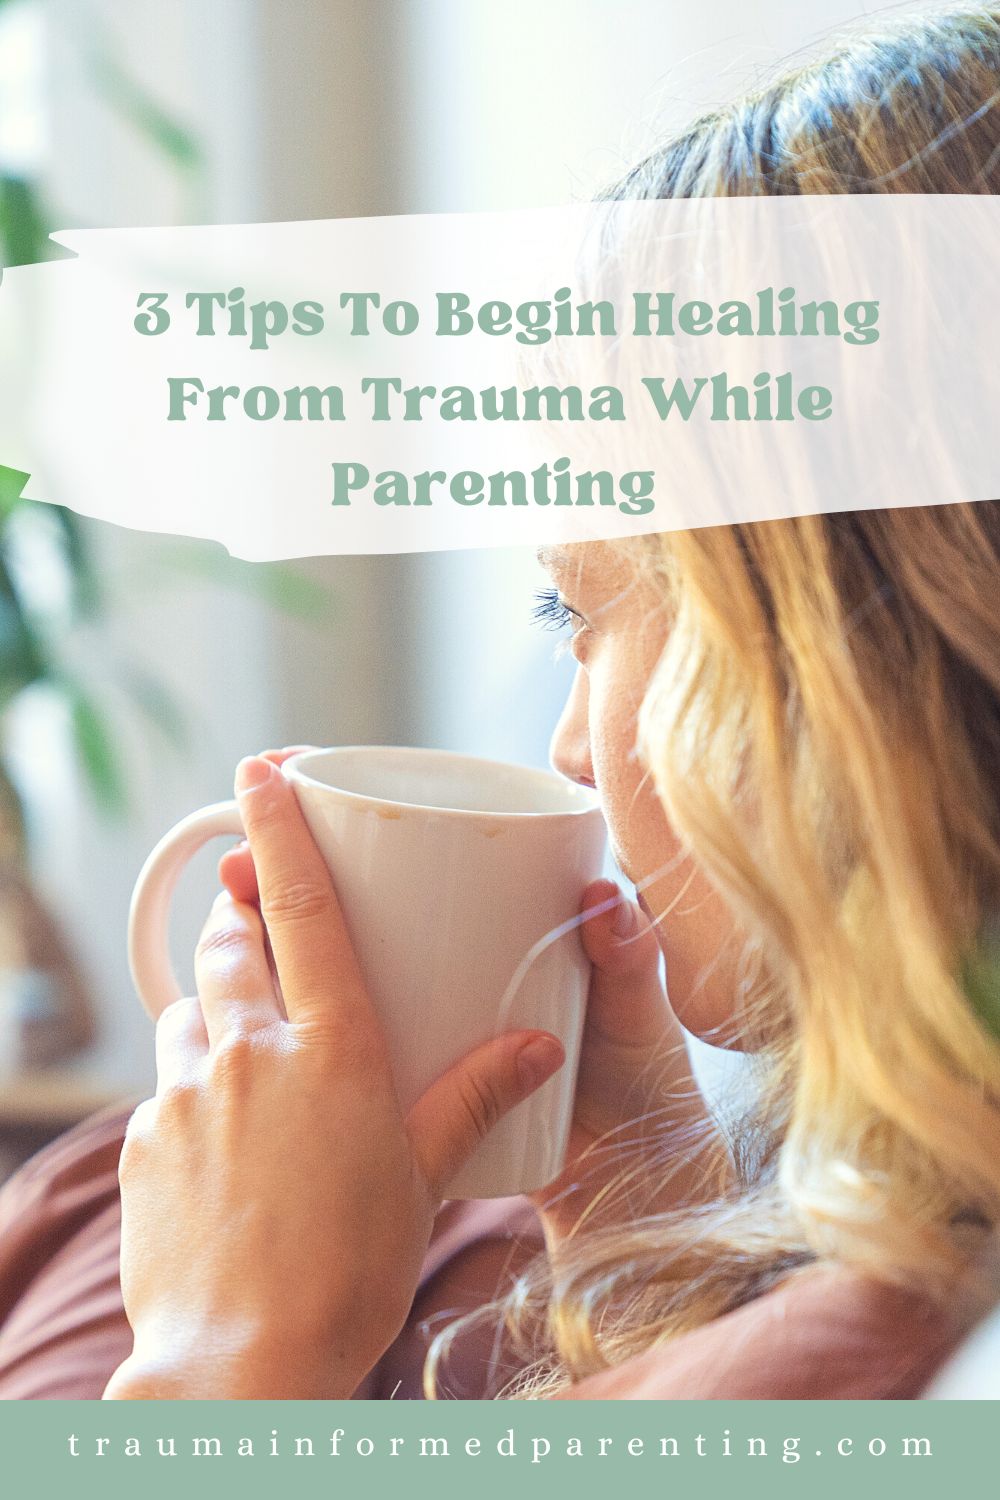 3 Tips To Begin Healing From Trauma While Parenting